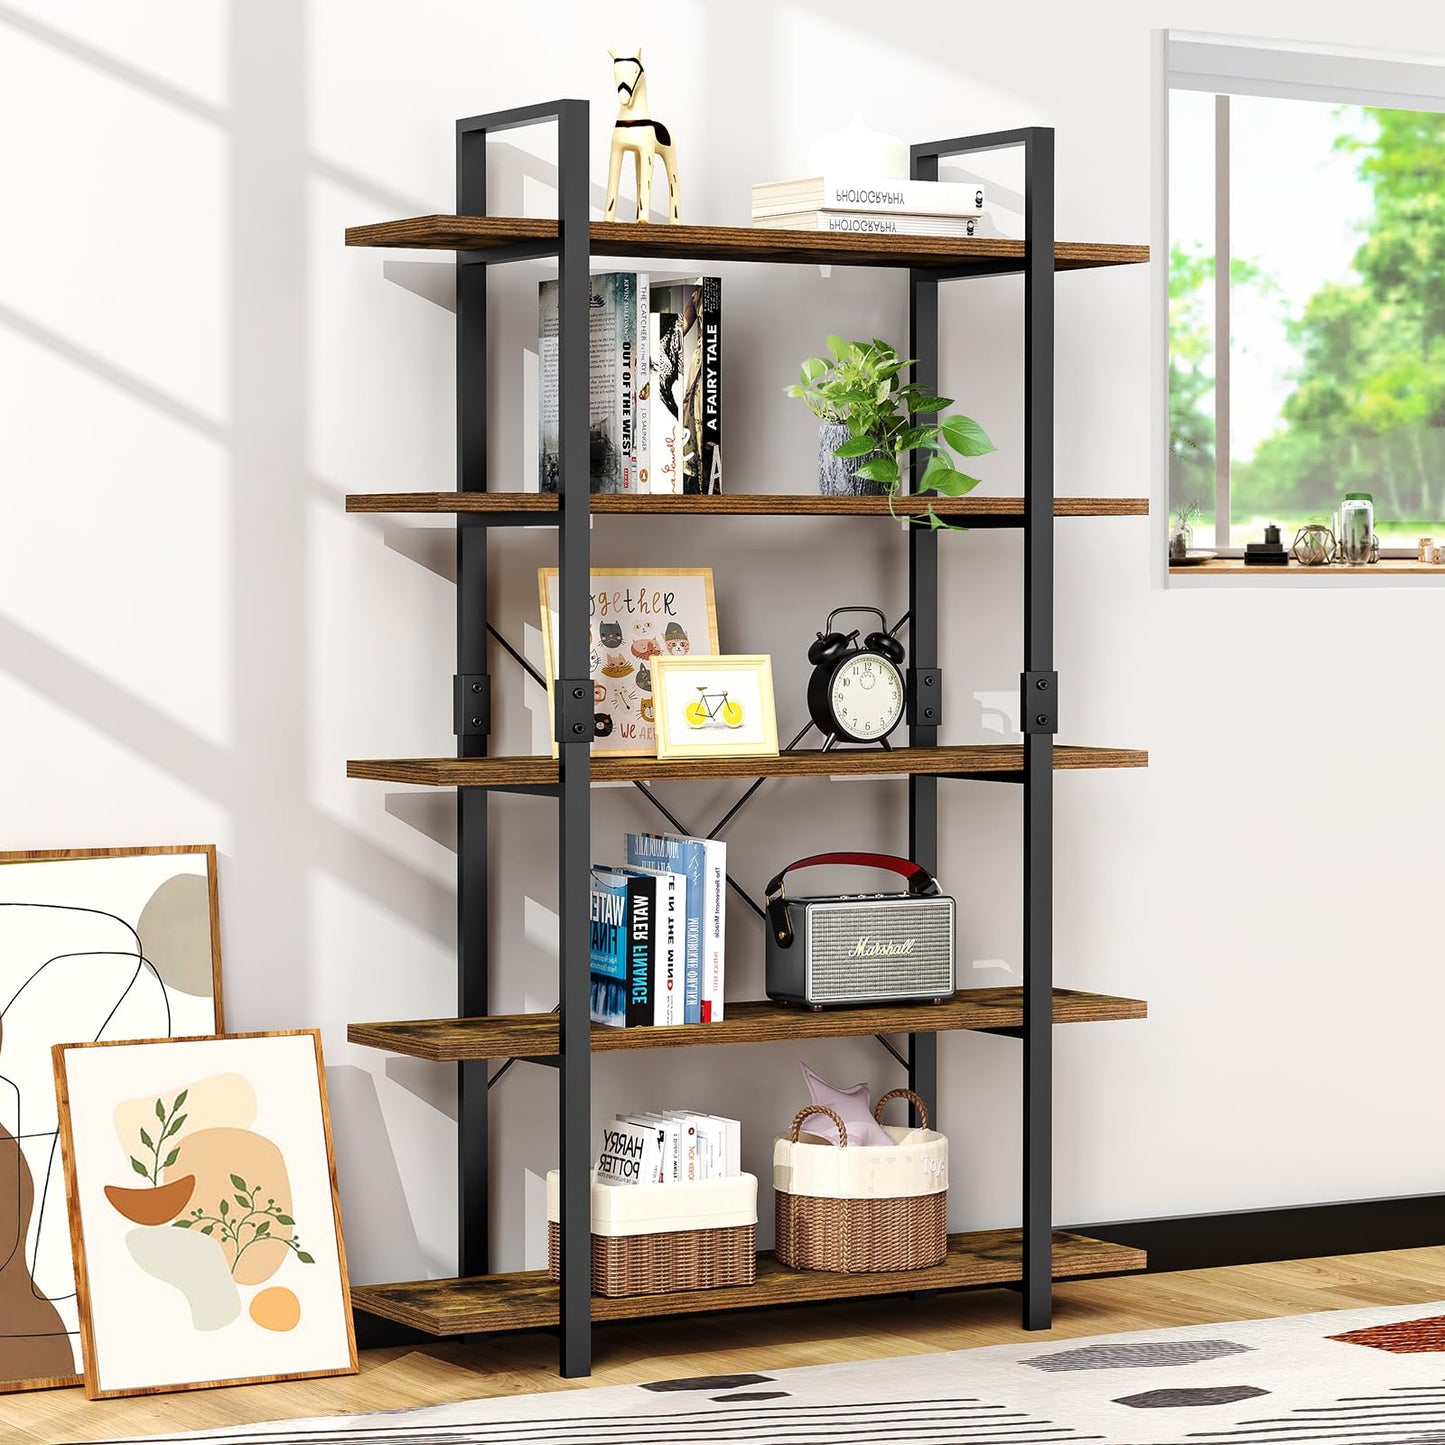 FRAPOW 5 Tier Bookshelf, 70 inch Tall Solid Bookcase Industrial Wooden Bookshelves Large Wall Etagere Rustic Vintage Book Shelf with Metal Frame Open